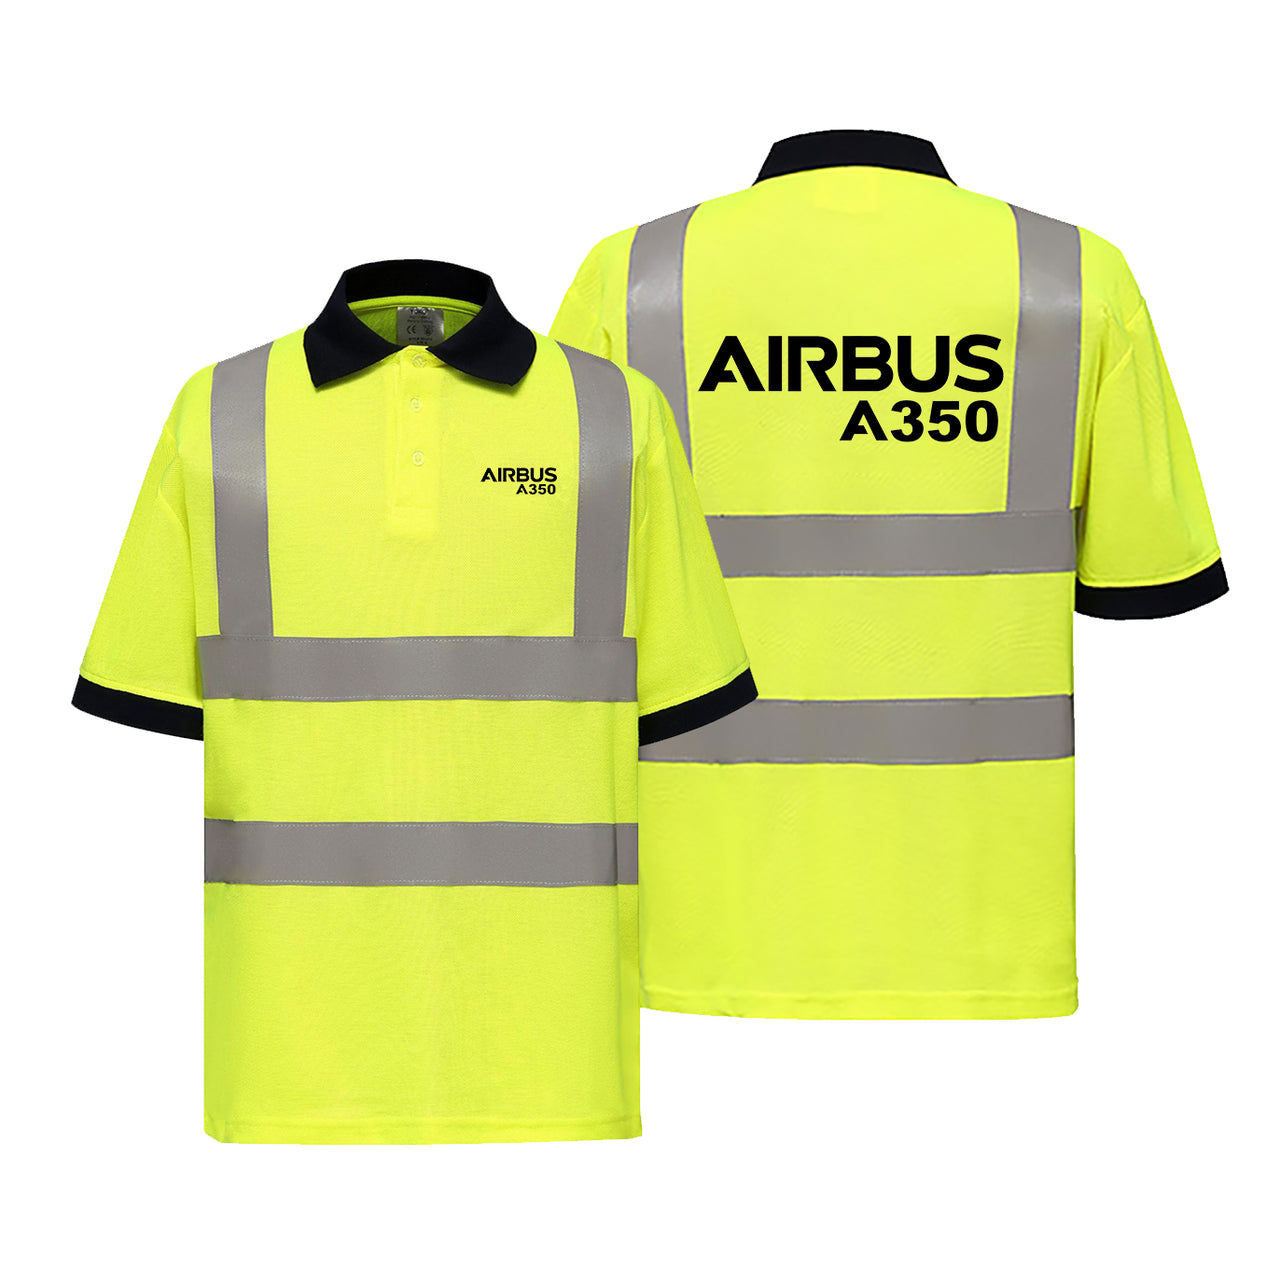 Airbus A350 & Text Designed Reflective Polo T-Shirts